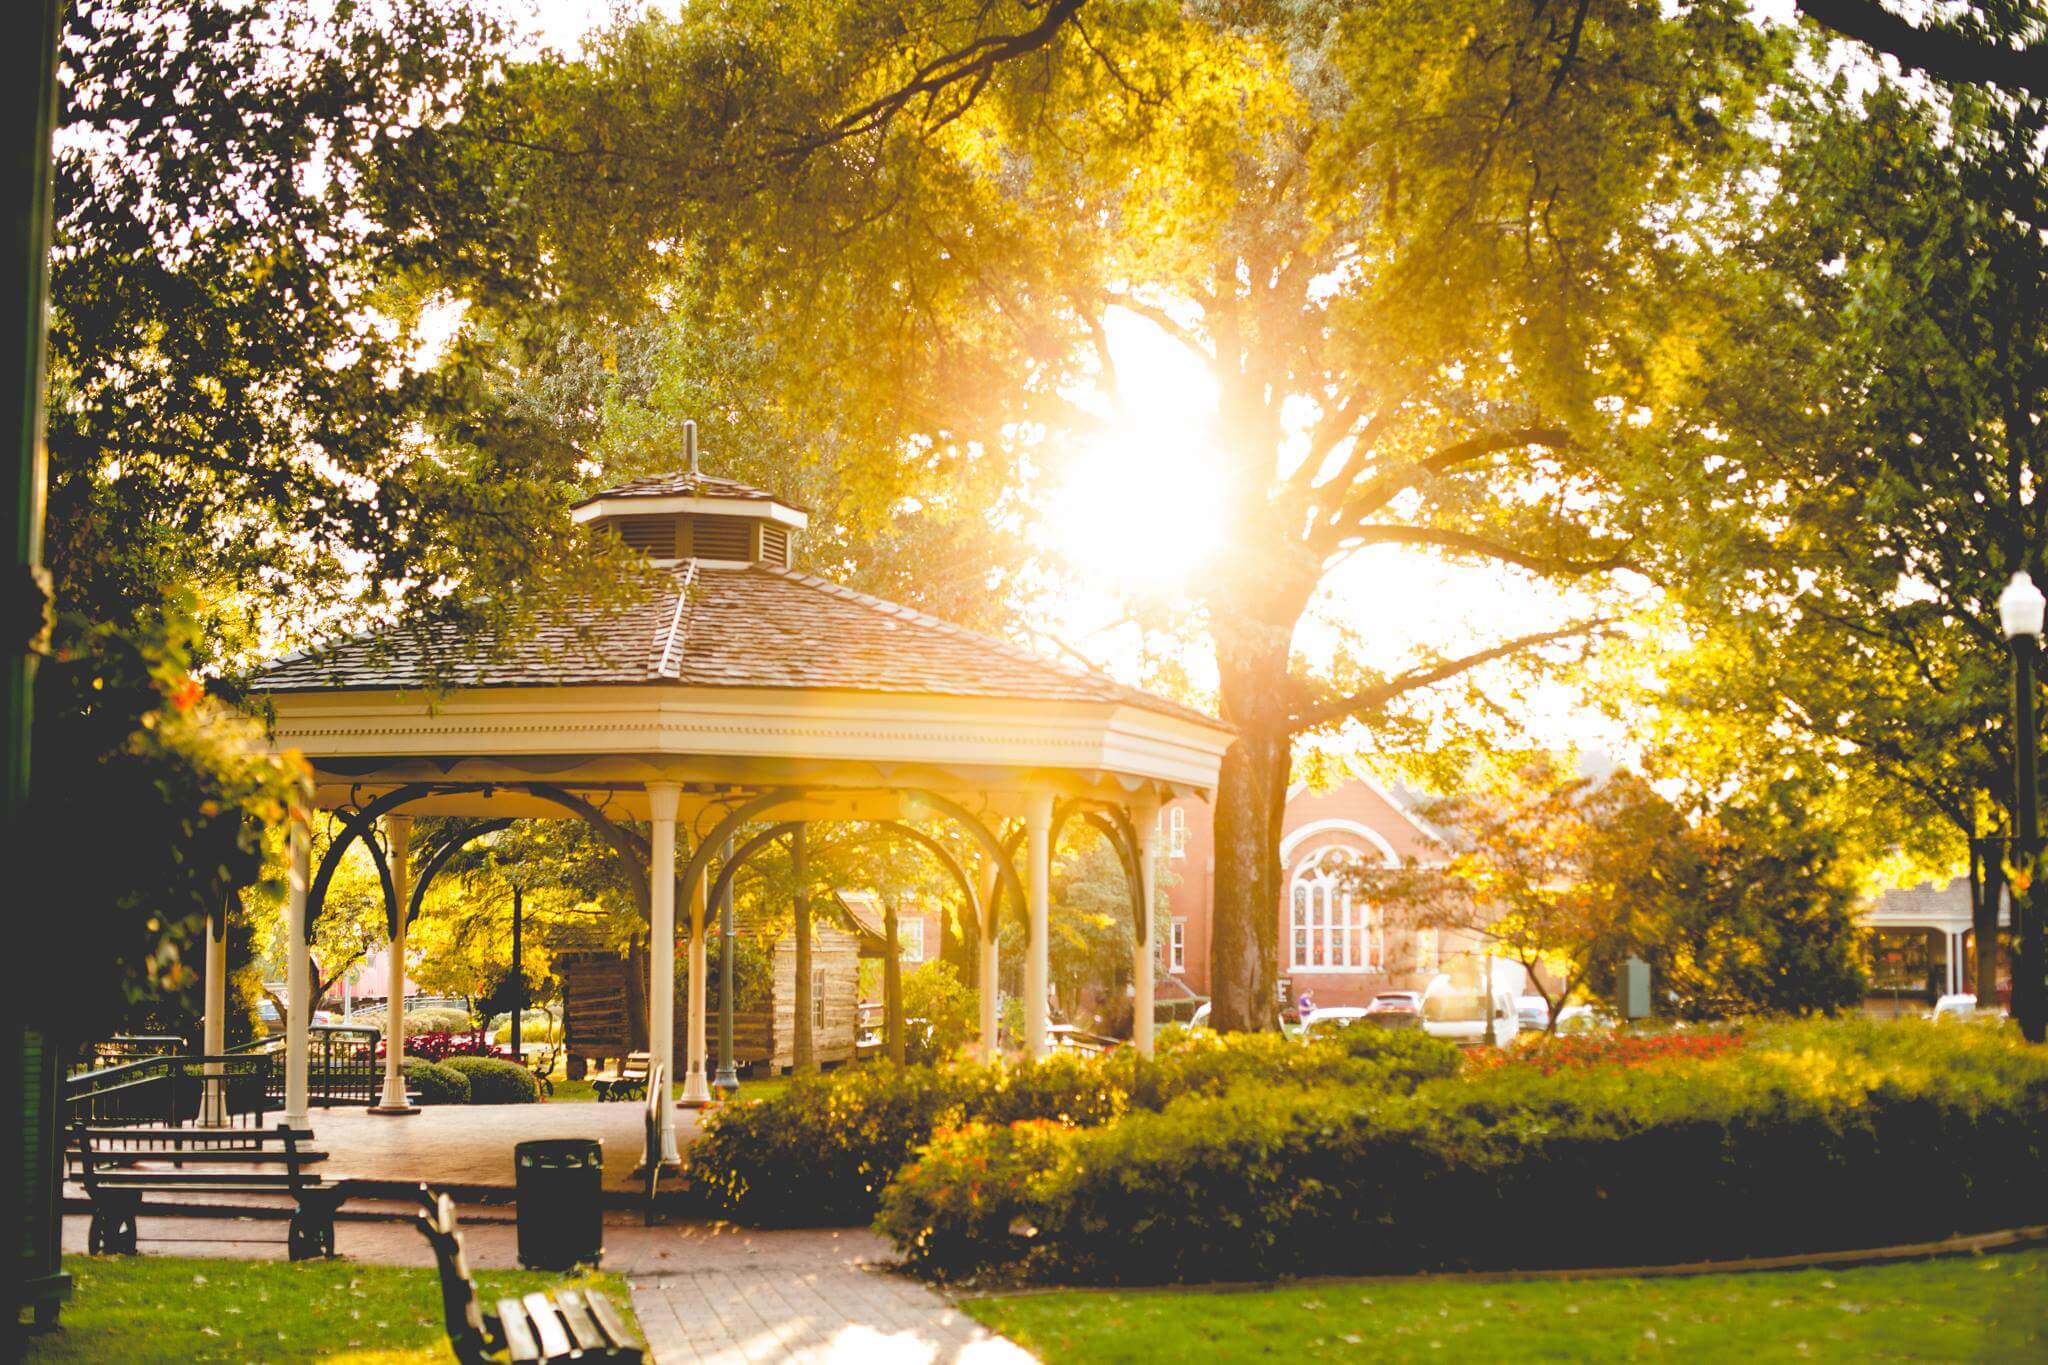 The gazebo of Collierville, Tennessee 